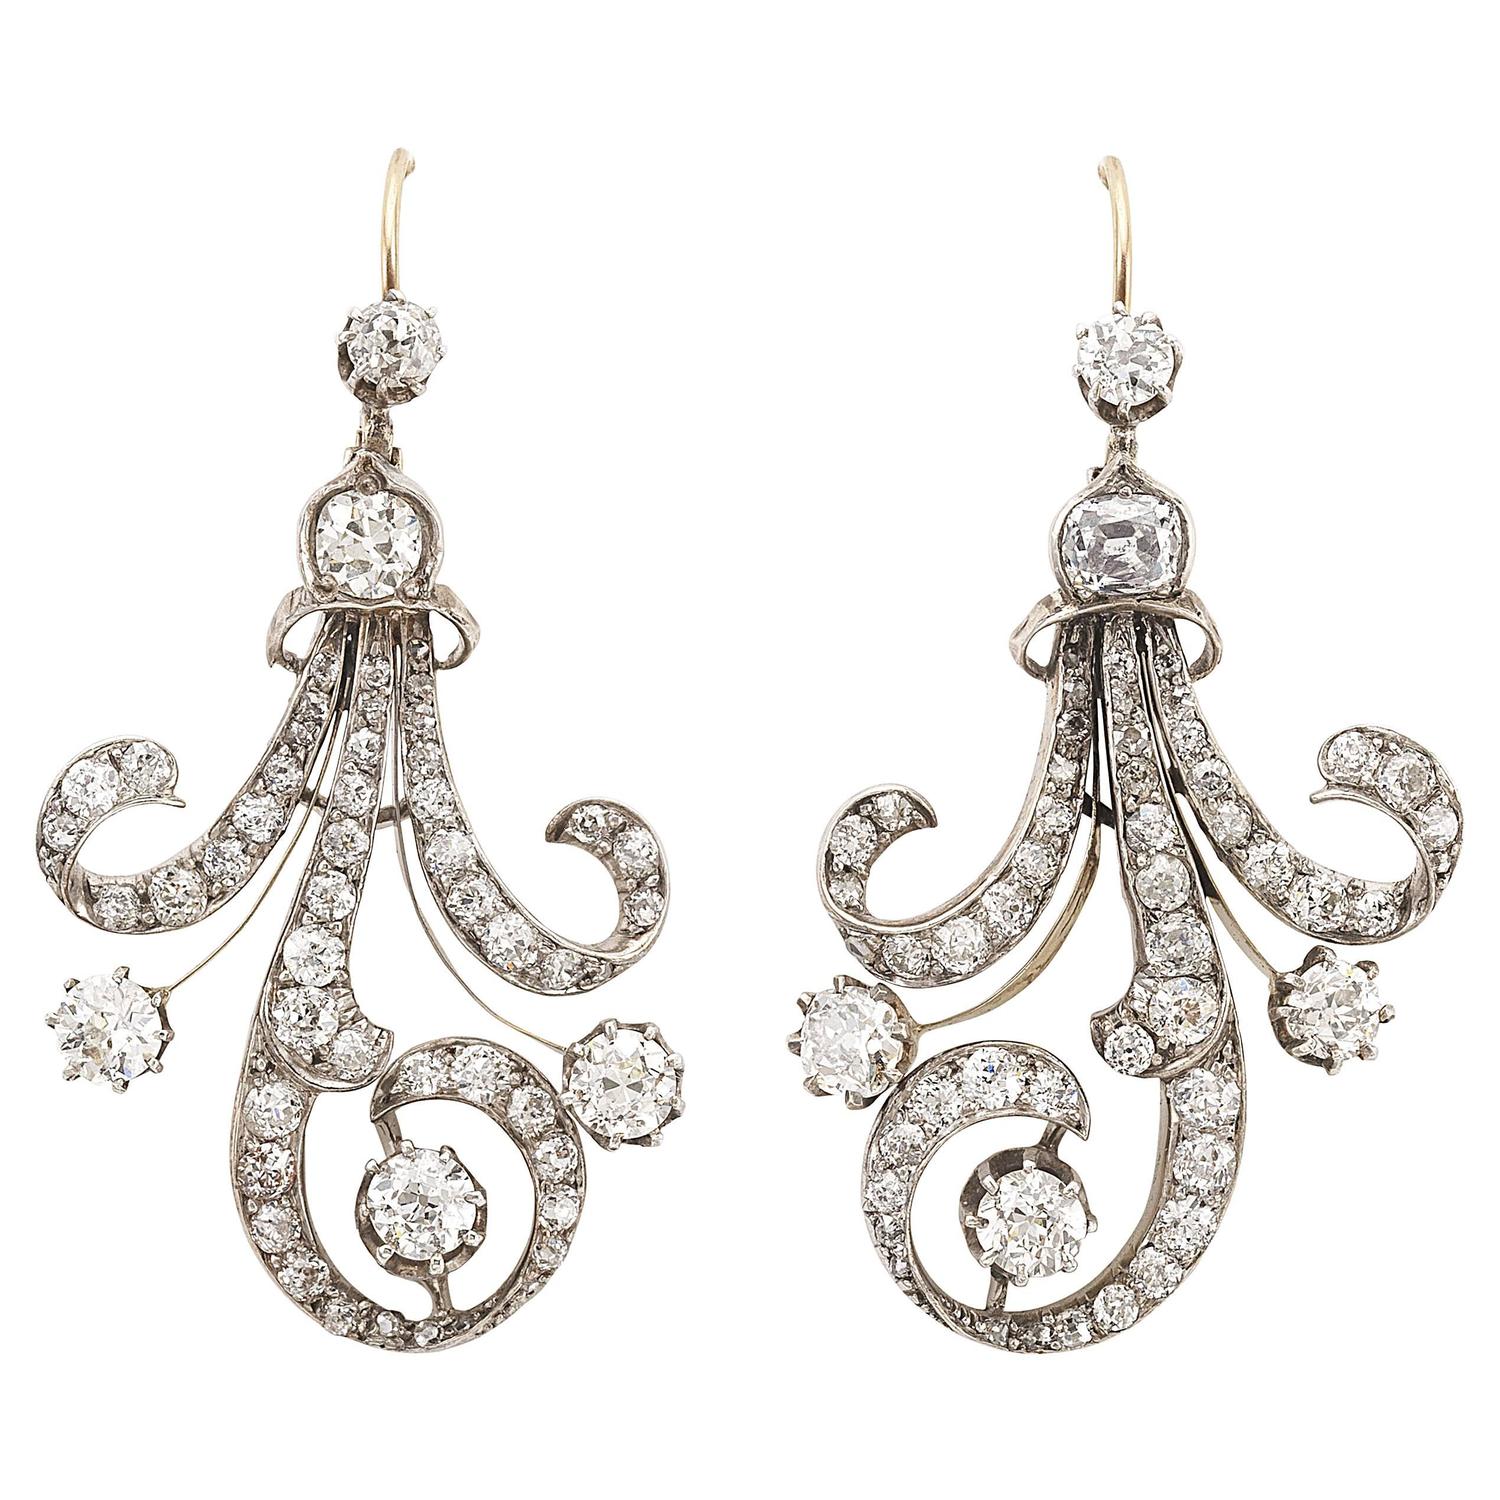 Antique Diamond Silver Gold Earrings For Sale at 1stdibs